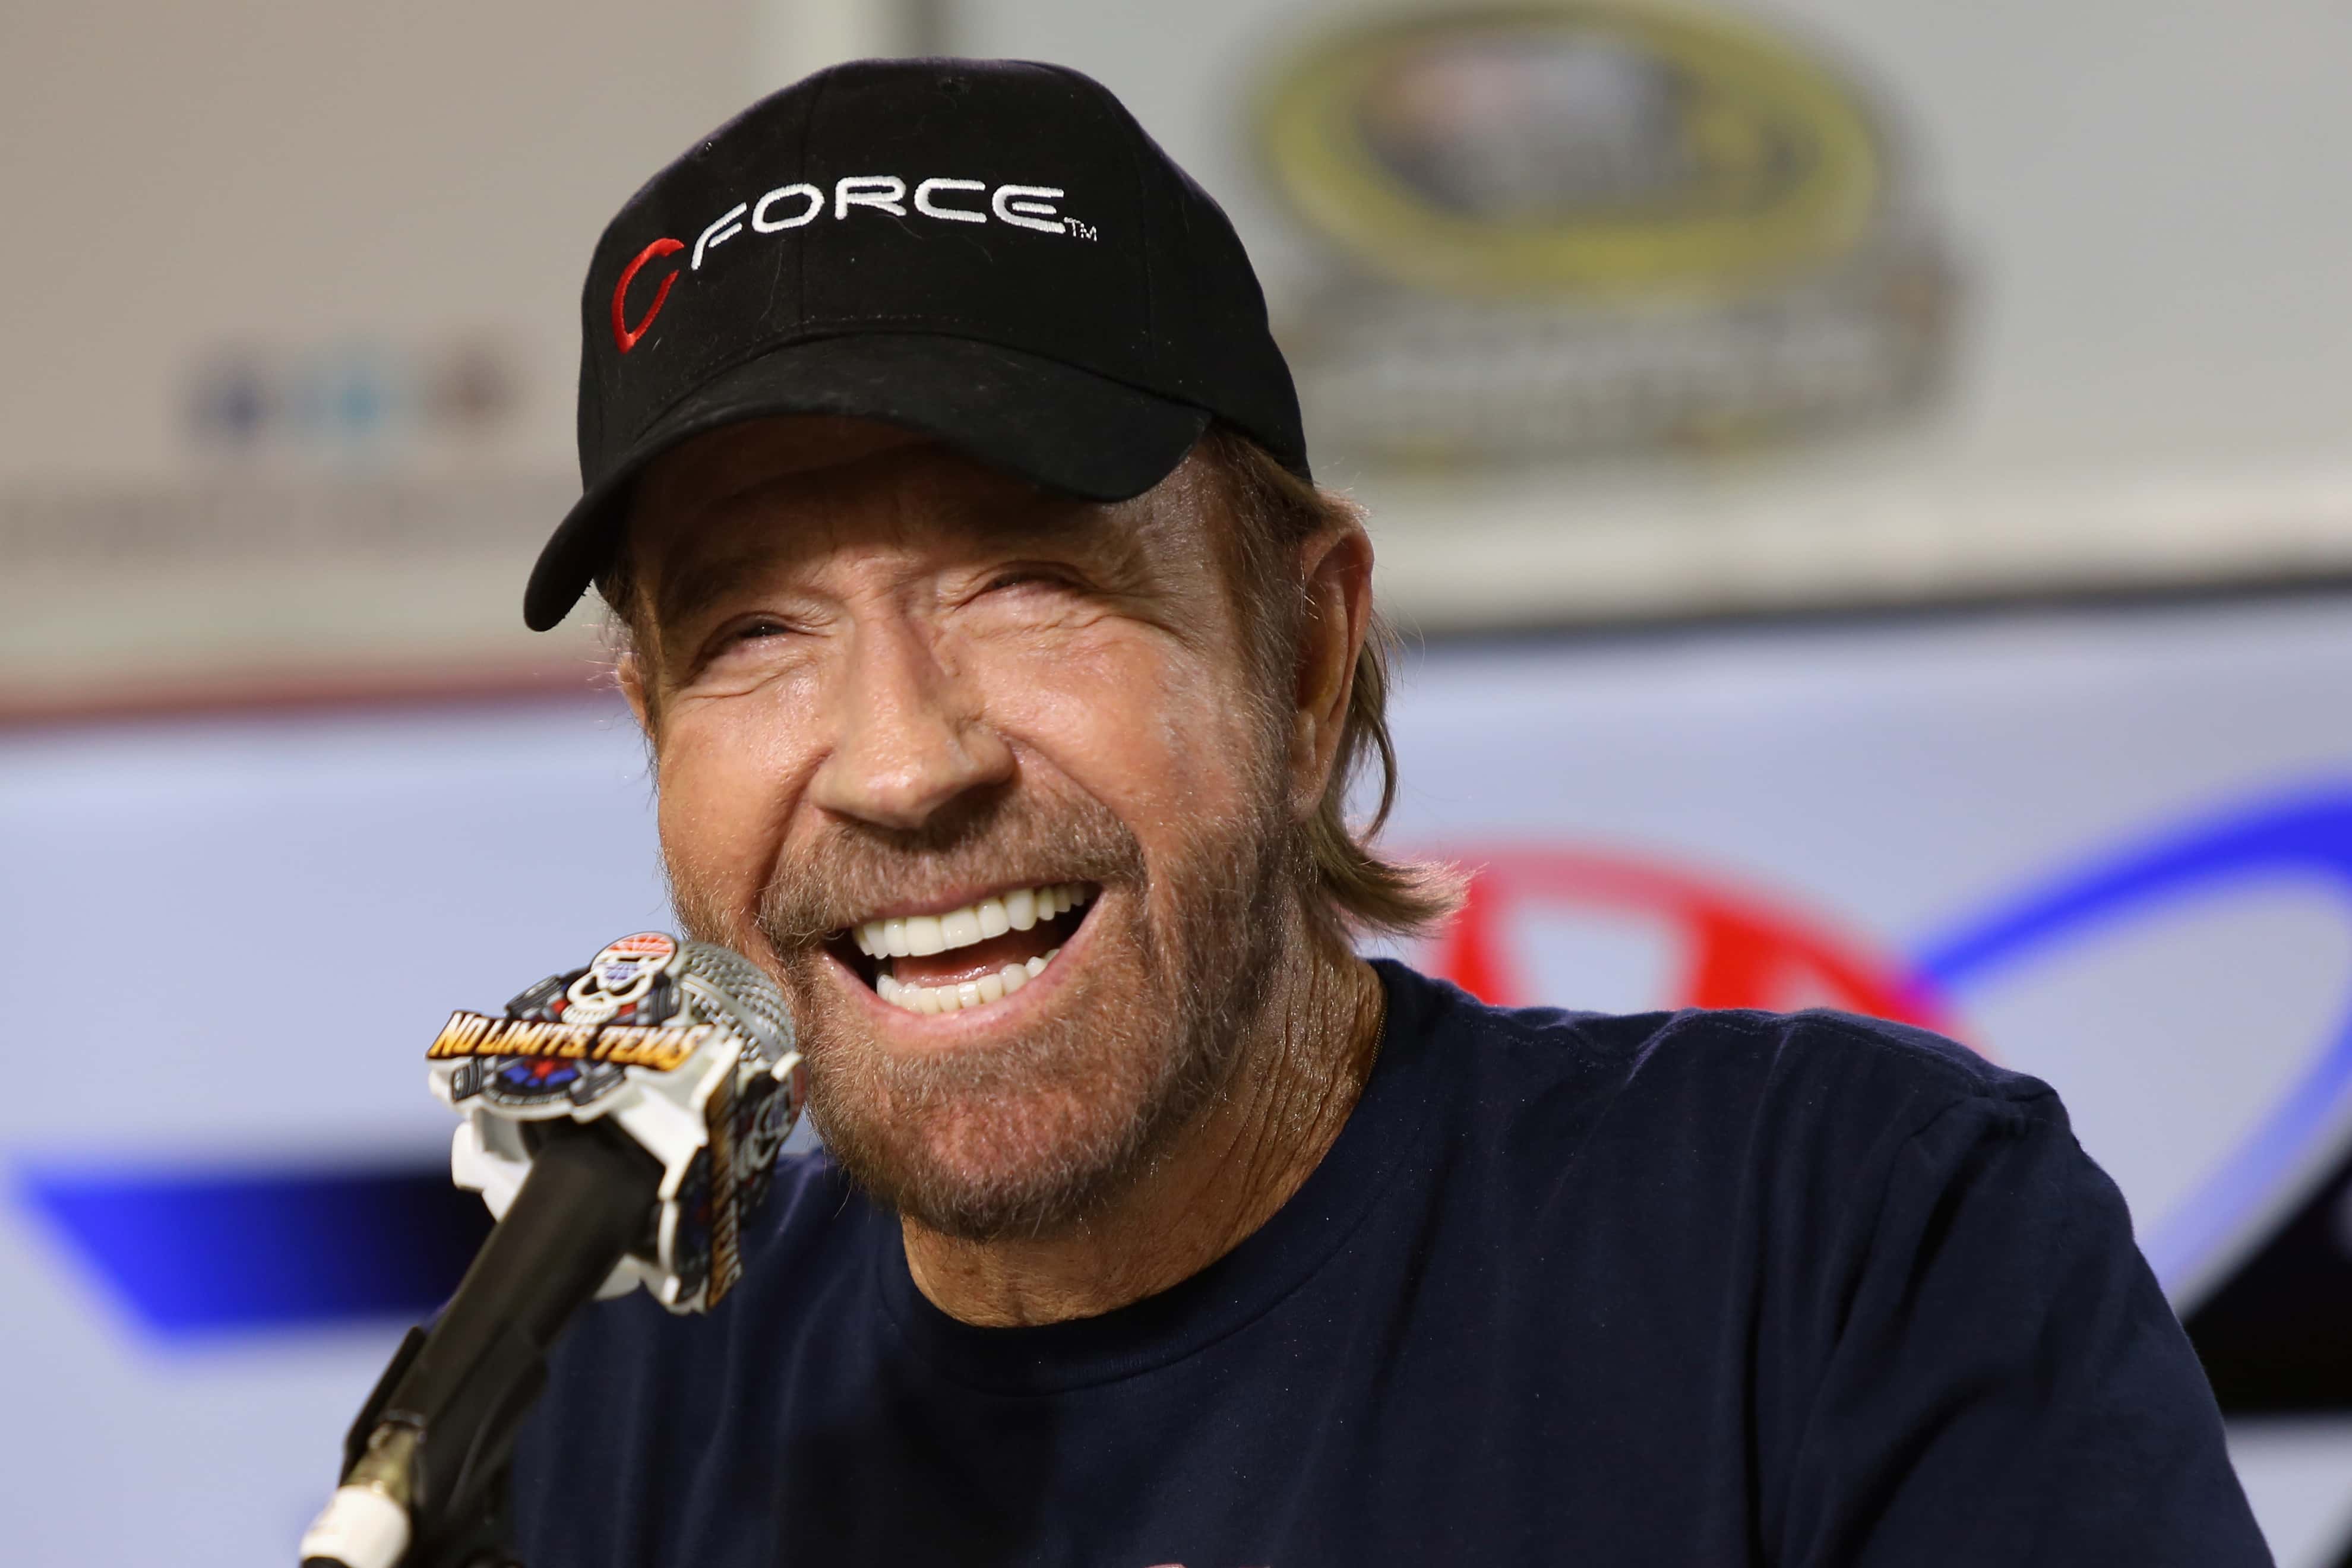 NASCAR Sprint Cup Series AAA Texas 500. Chuck Norris speaking with the media.